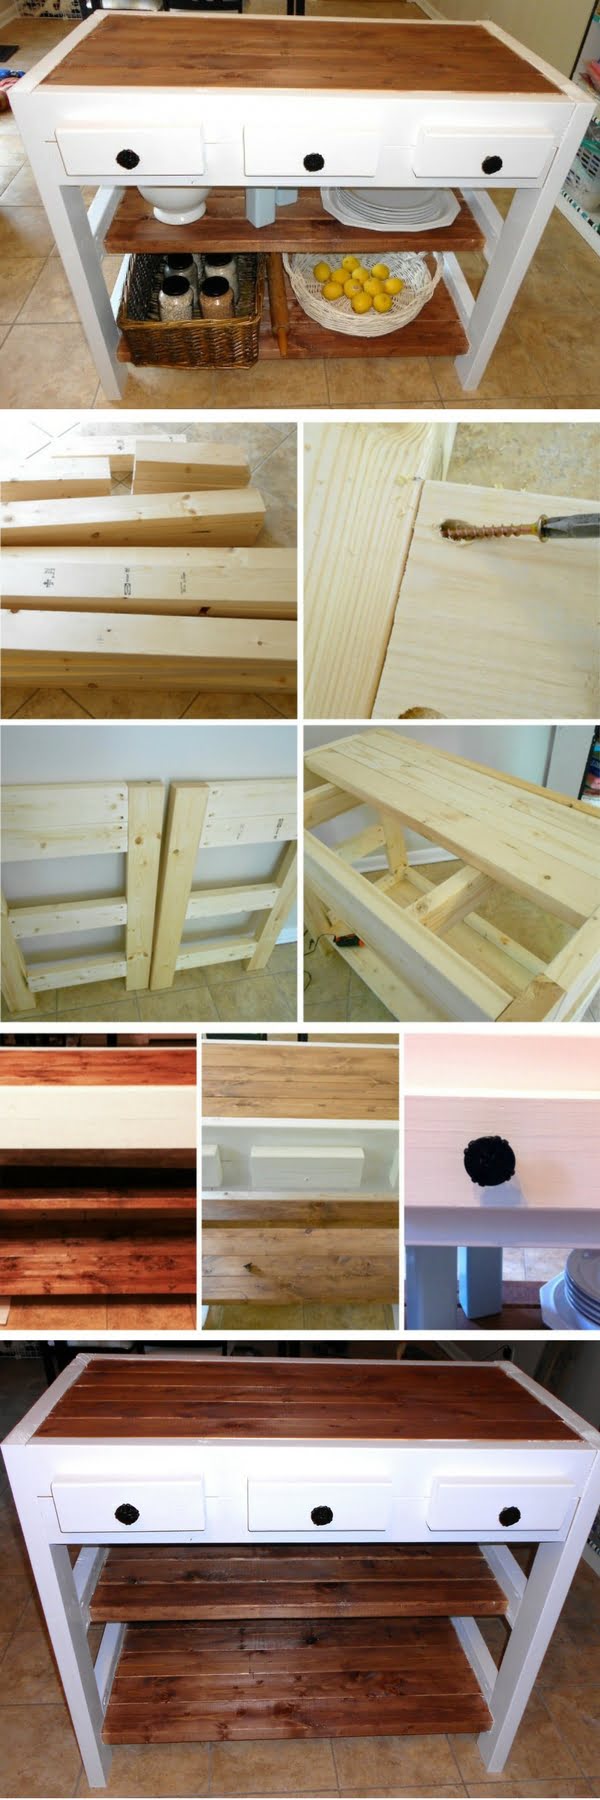 20 Crafty 2x4 DIY Projects That You Can Easily Make - Check out the tutorial on how to build a DIY kitchen island from 2x4s